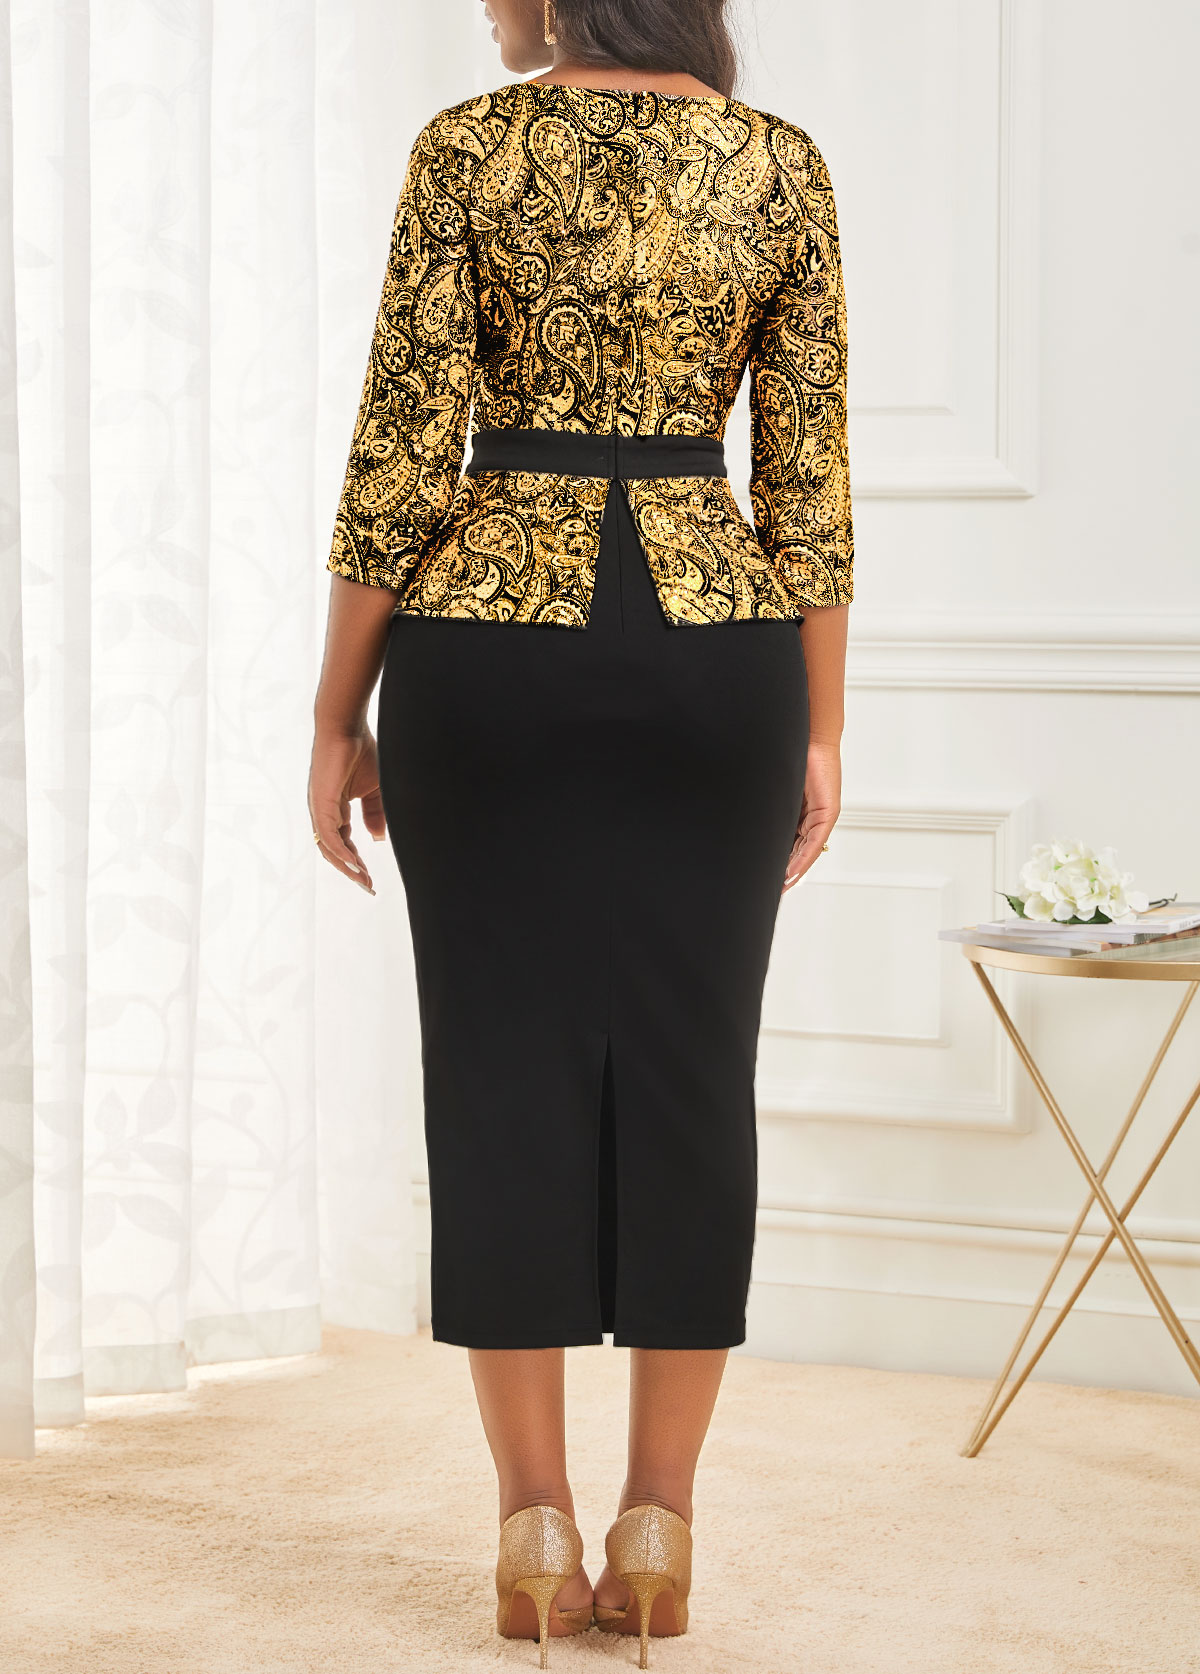 Hot Stamping Golden Paisley Print Bodycon Dress